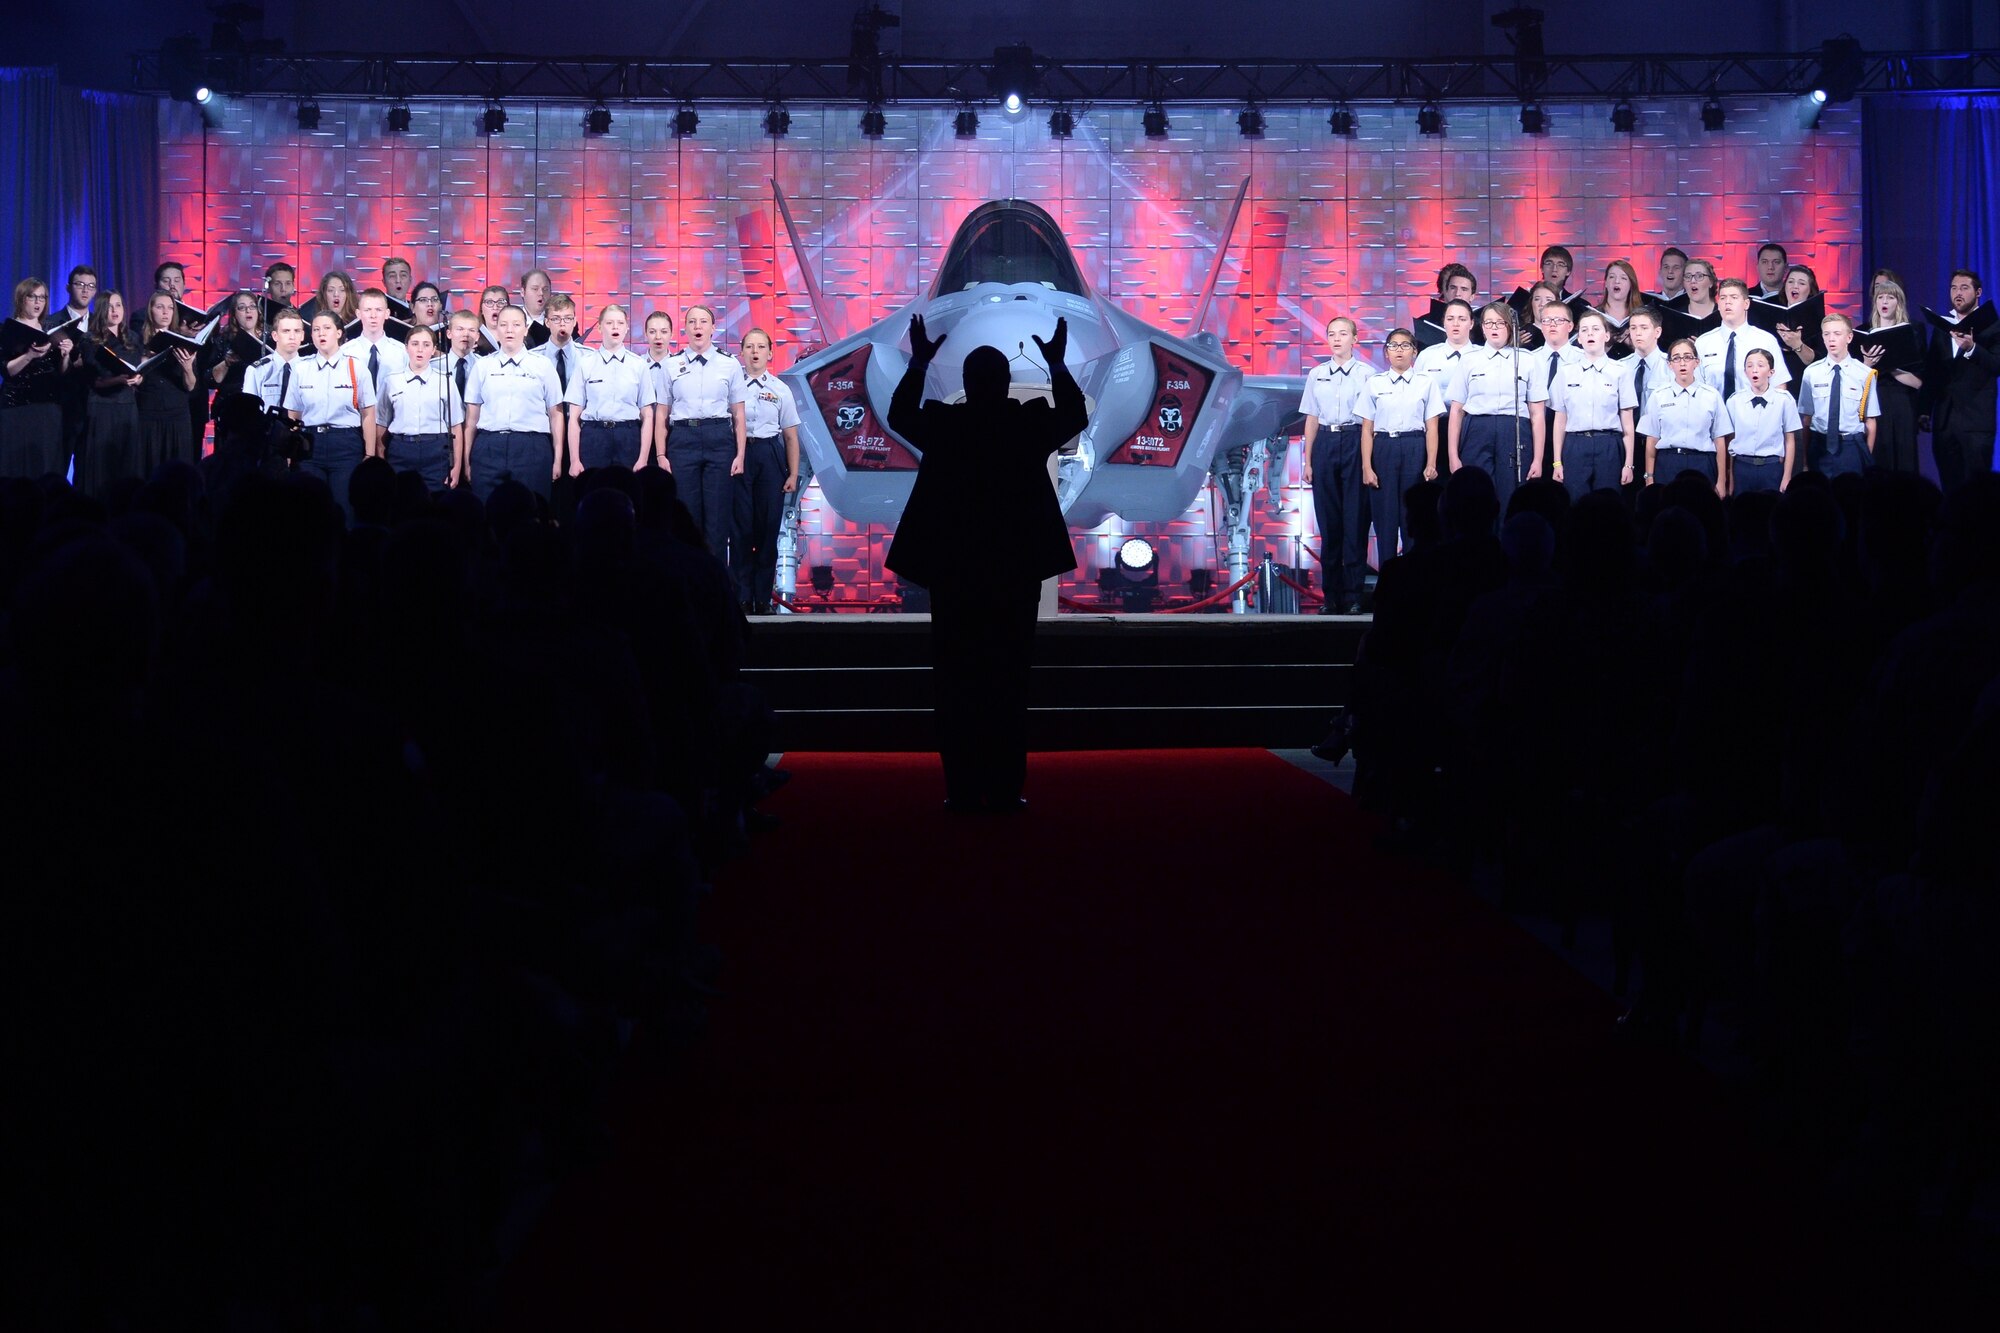 The Utah Military Academy Choir and Weber State University Chamber Choir perform during an F-35A Lightning II aircraft unveiling ceremony at Hill Air Force Base, Utah, Oct. 14, 2015. The unveiling commemorated the arrival of the Lightning II to the base. The 388th and 419th Fighter Wings at Hill were selected as the first Air Force units to fly combat-coded F-35s. (U.S. Air Force photo by R. Nial Bradshaw/Released)